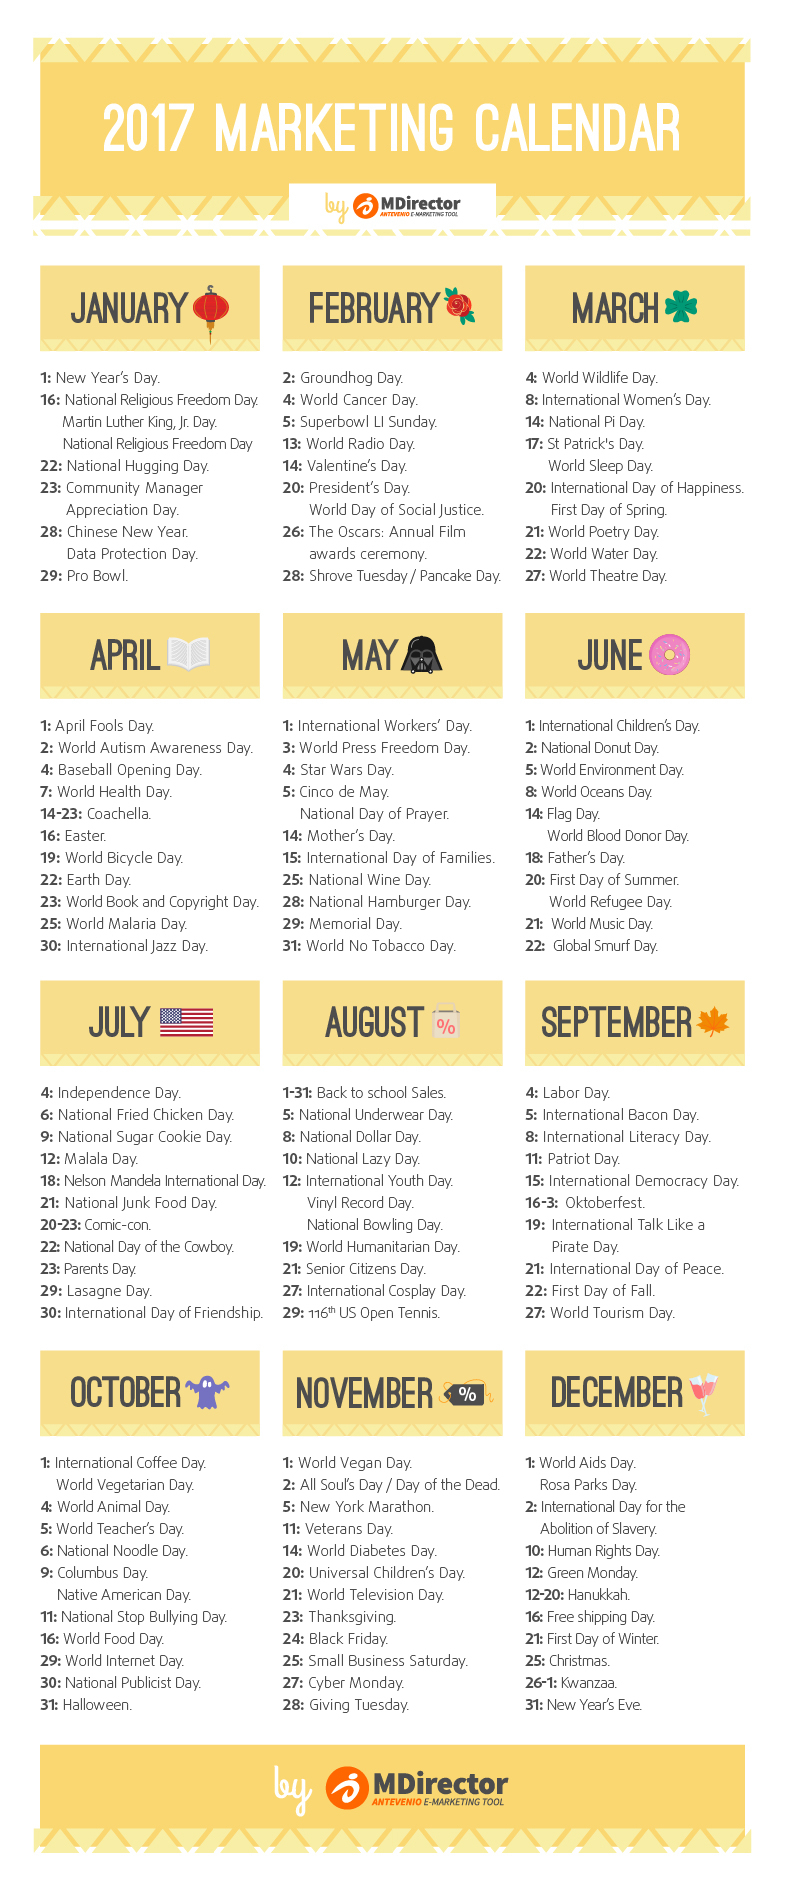 2017 Calendar Of Important Events For Your Marketing Plans